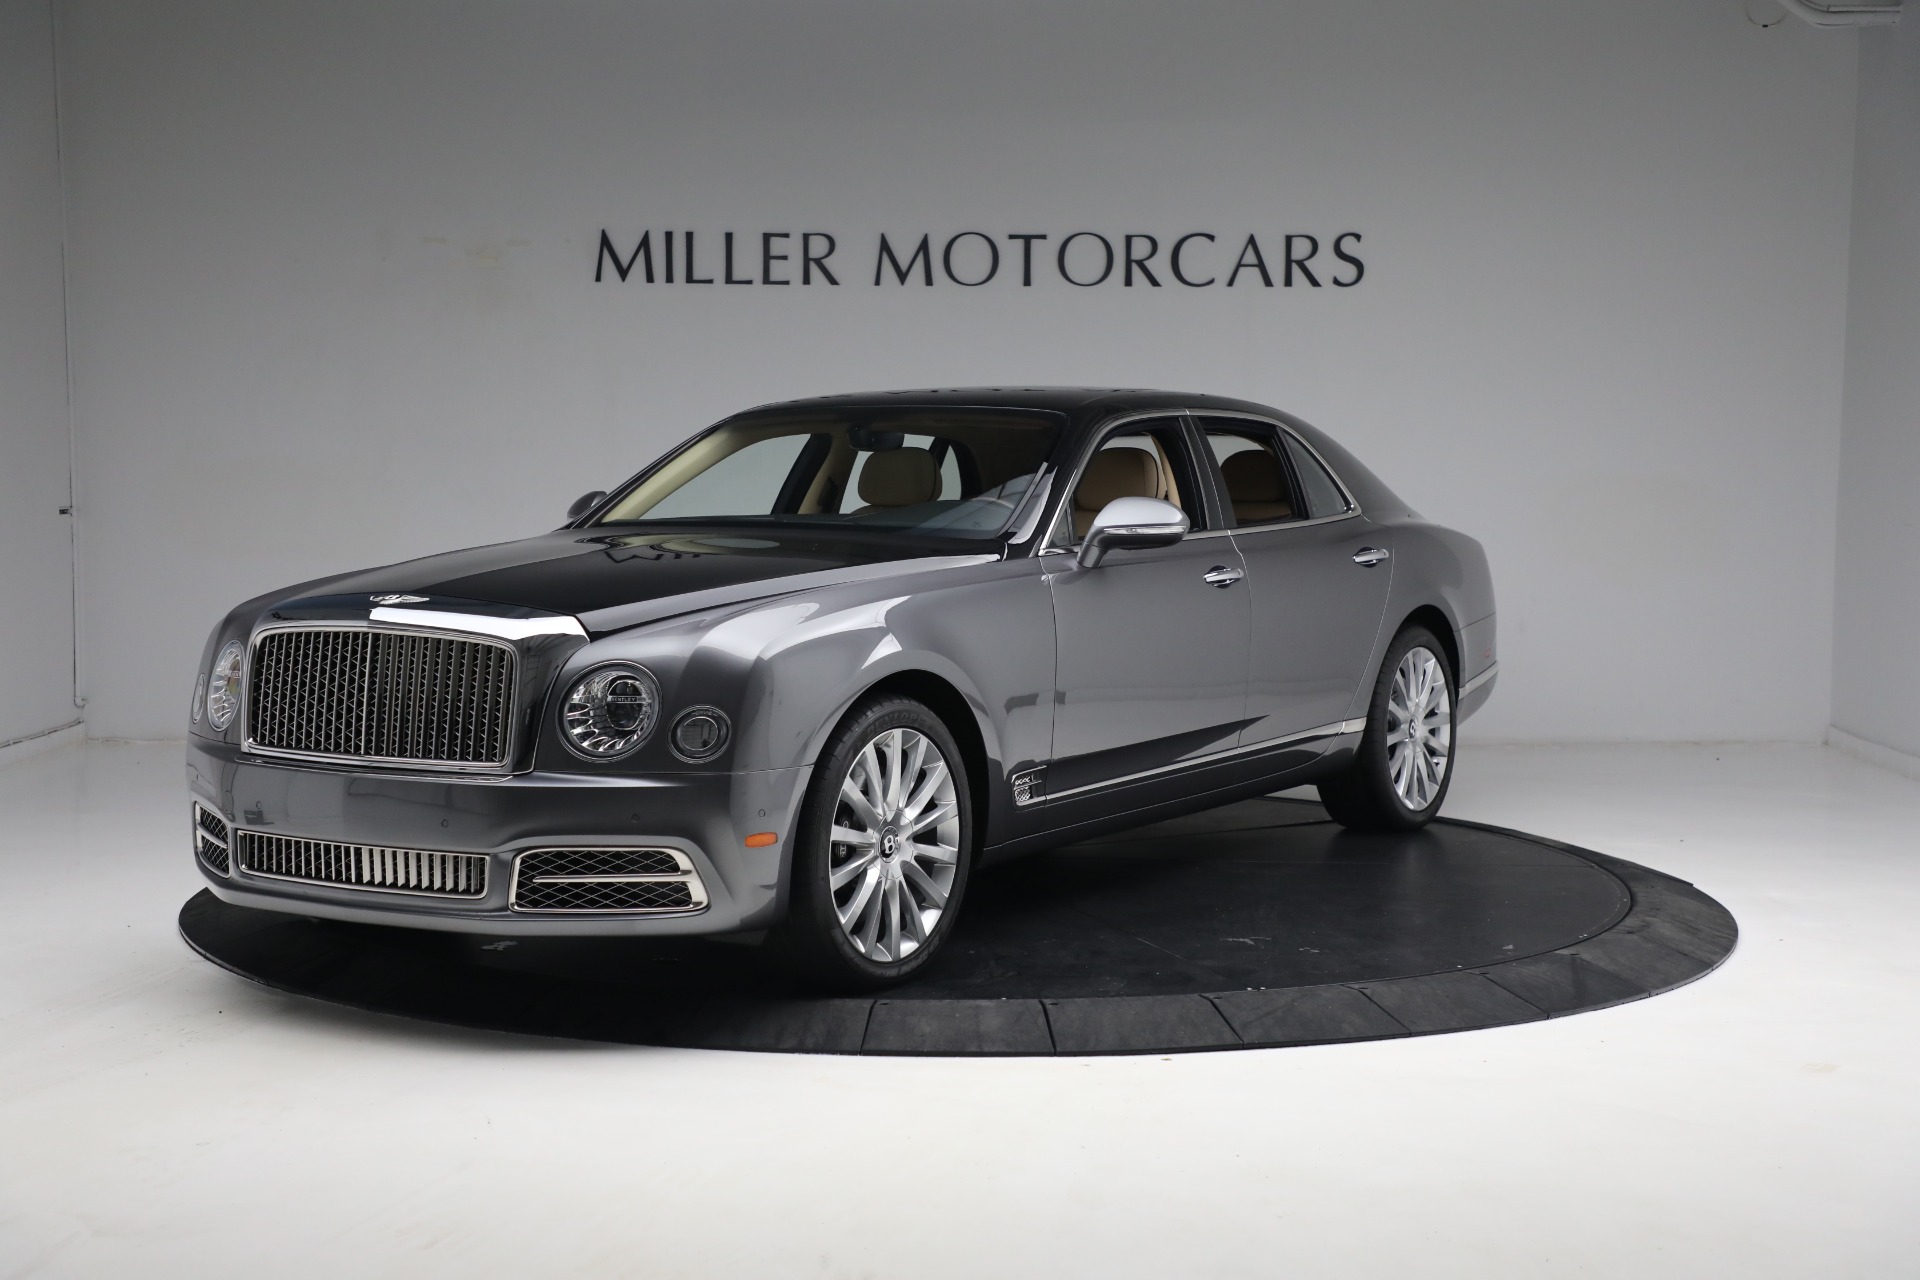 Used 2020 Bentley Mulsanne for sale Sold at Rolls-Royce Motor Cars Greenwich in Greenwich CT 06830 1